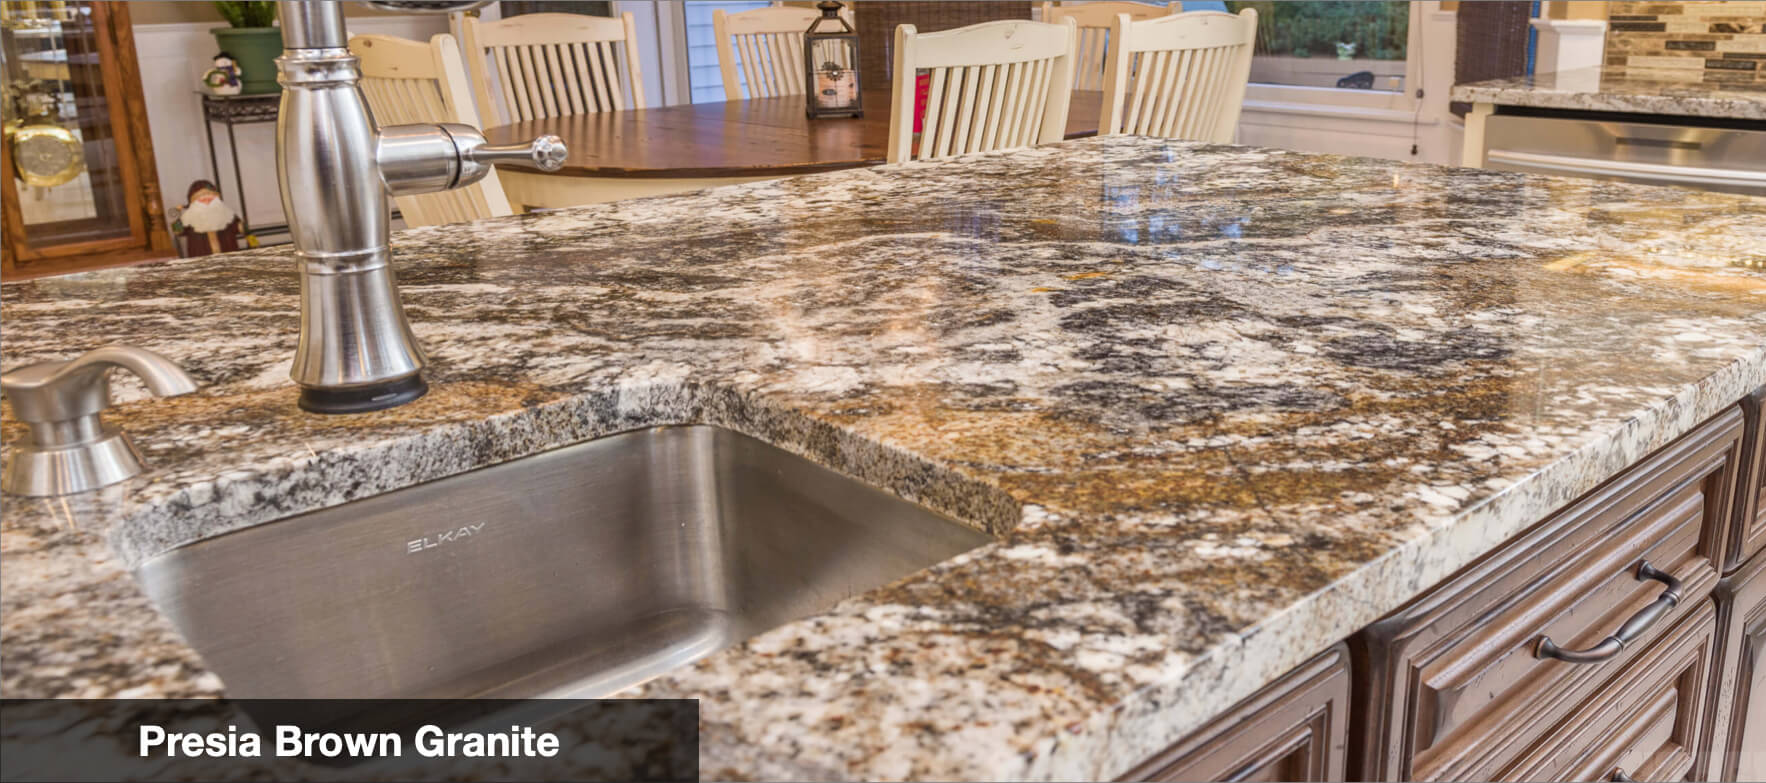 Which is better? Granite Countertops or Quartz Countertops (Engineered Stone)